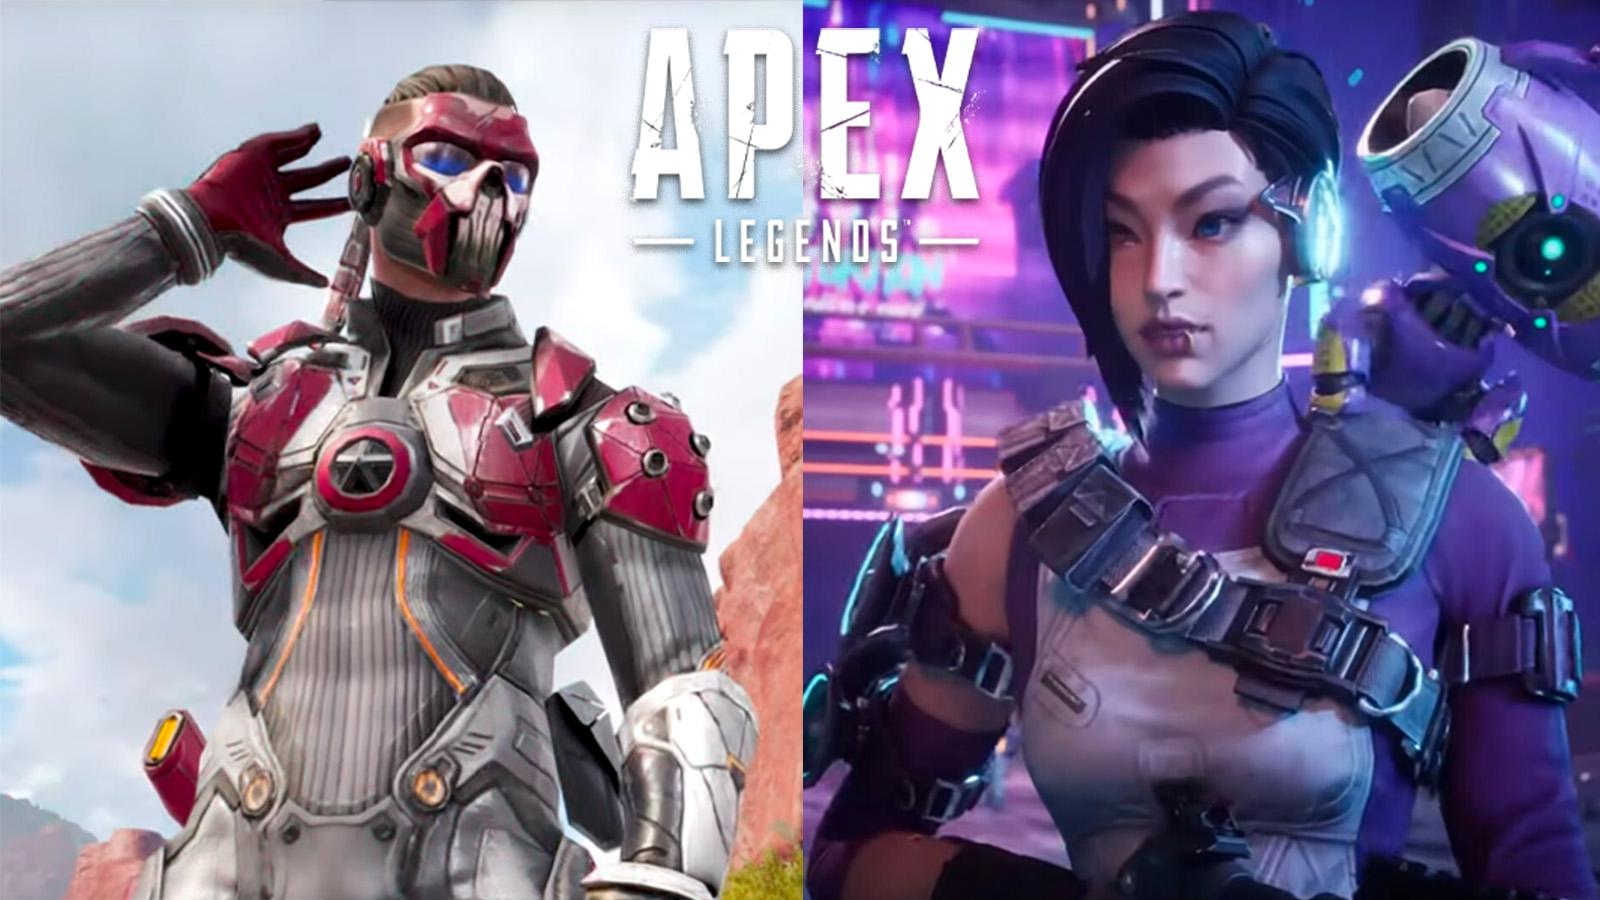 Fade and Rhapsody from Apex Legends